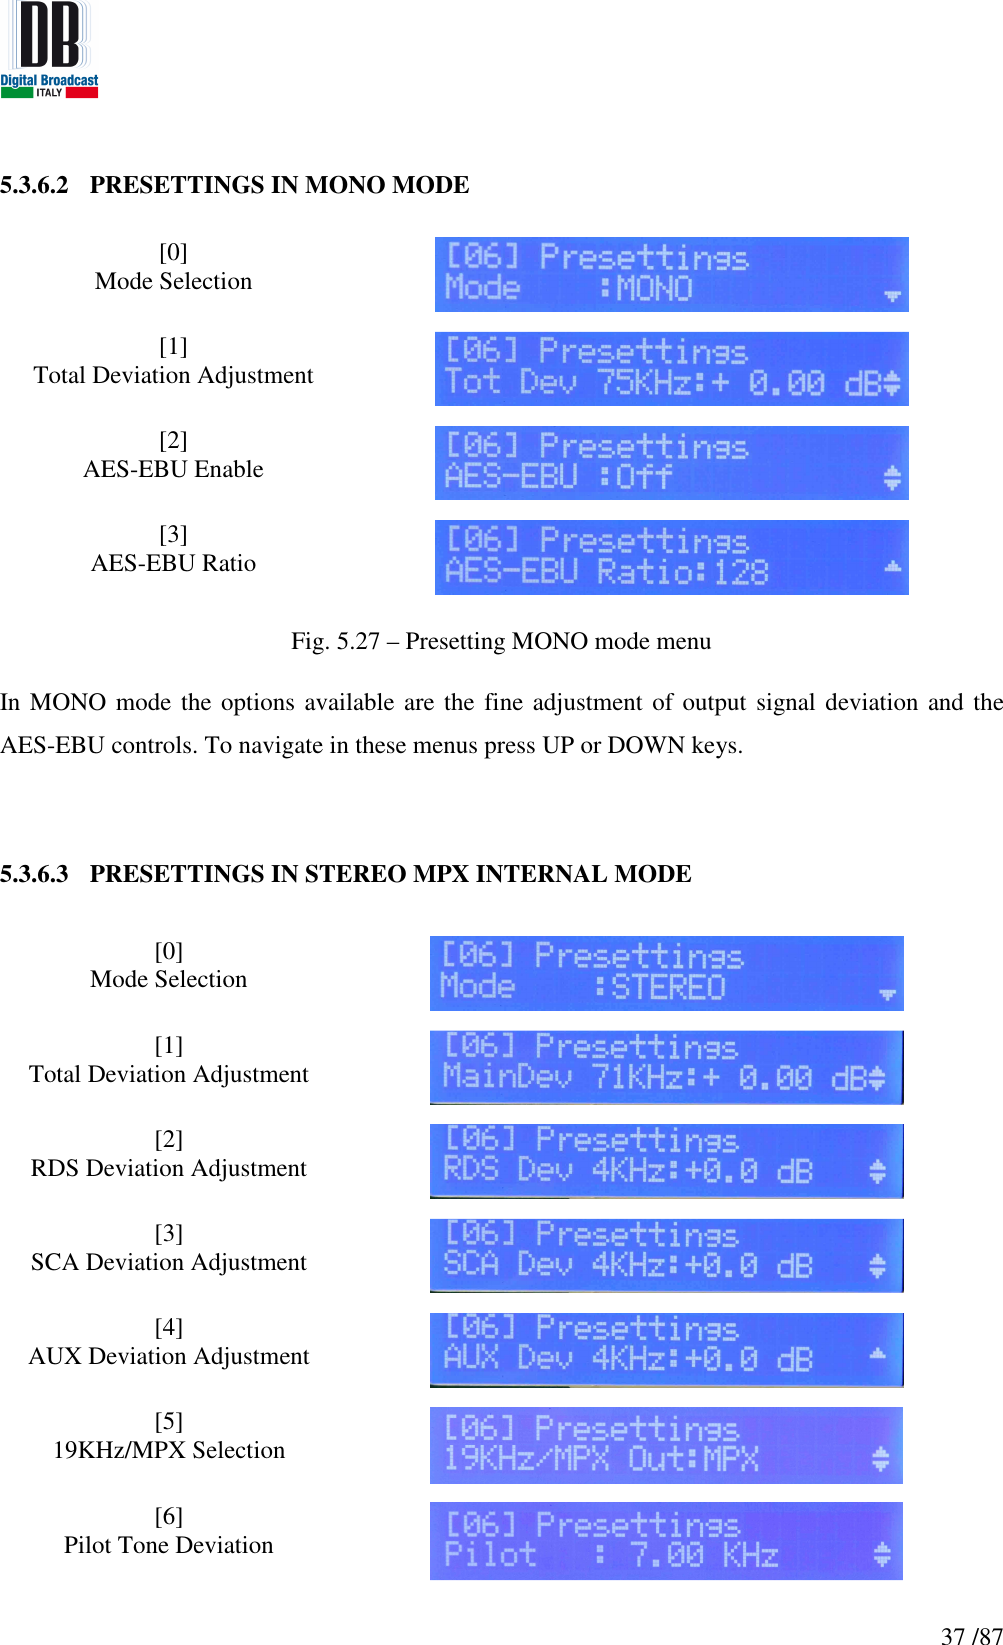   37 /87 5.3.6.2 PRESETTINGS IN MONO MODE   [0] Mode Selection    [1] Total Deviation Adjustment    [2] AES-EBU Enable    [3] AES-EBU Ratio     Fig. 5.27 – Presetting MONO mode menu  In MONO mode  the options available are the fine adjustment of output signal deviation and the AES-EBU controls. To navigate in these menus press UP or DOWN keys.   5.3.6.3 PRESETTINGS IN STEREO MPX INTERNAL MODE   [0] Mode Selection    [1] Total Deviation Adjustment    [2] RDS Deviation Adjustment    [3] SCA Deviation Adjustment    [4] AUX Deviation Adjustment    [5] 19KHz/MPX Selection    [6] Pilot Tone Deviation  